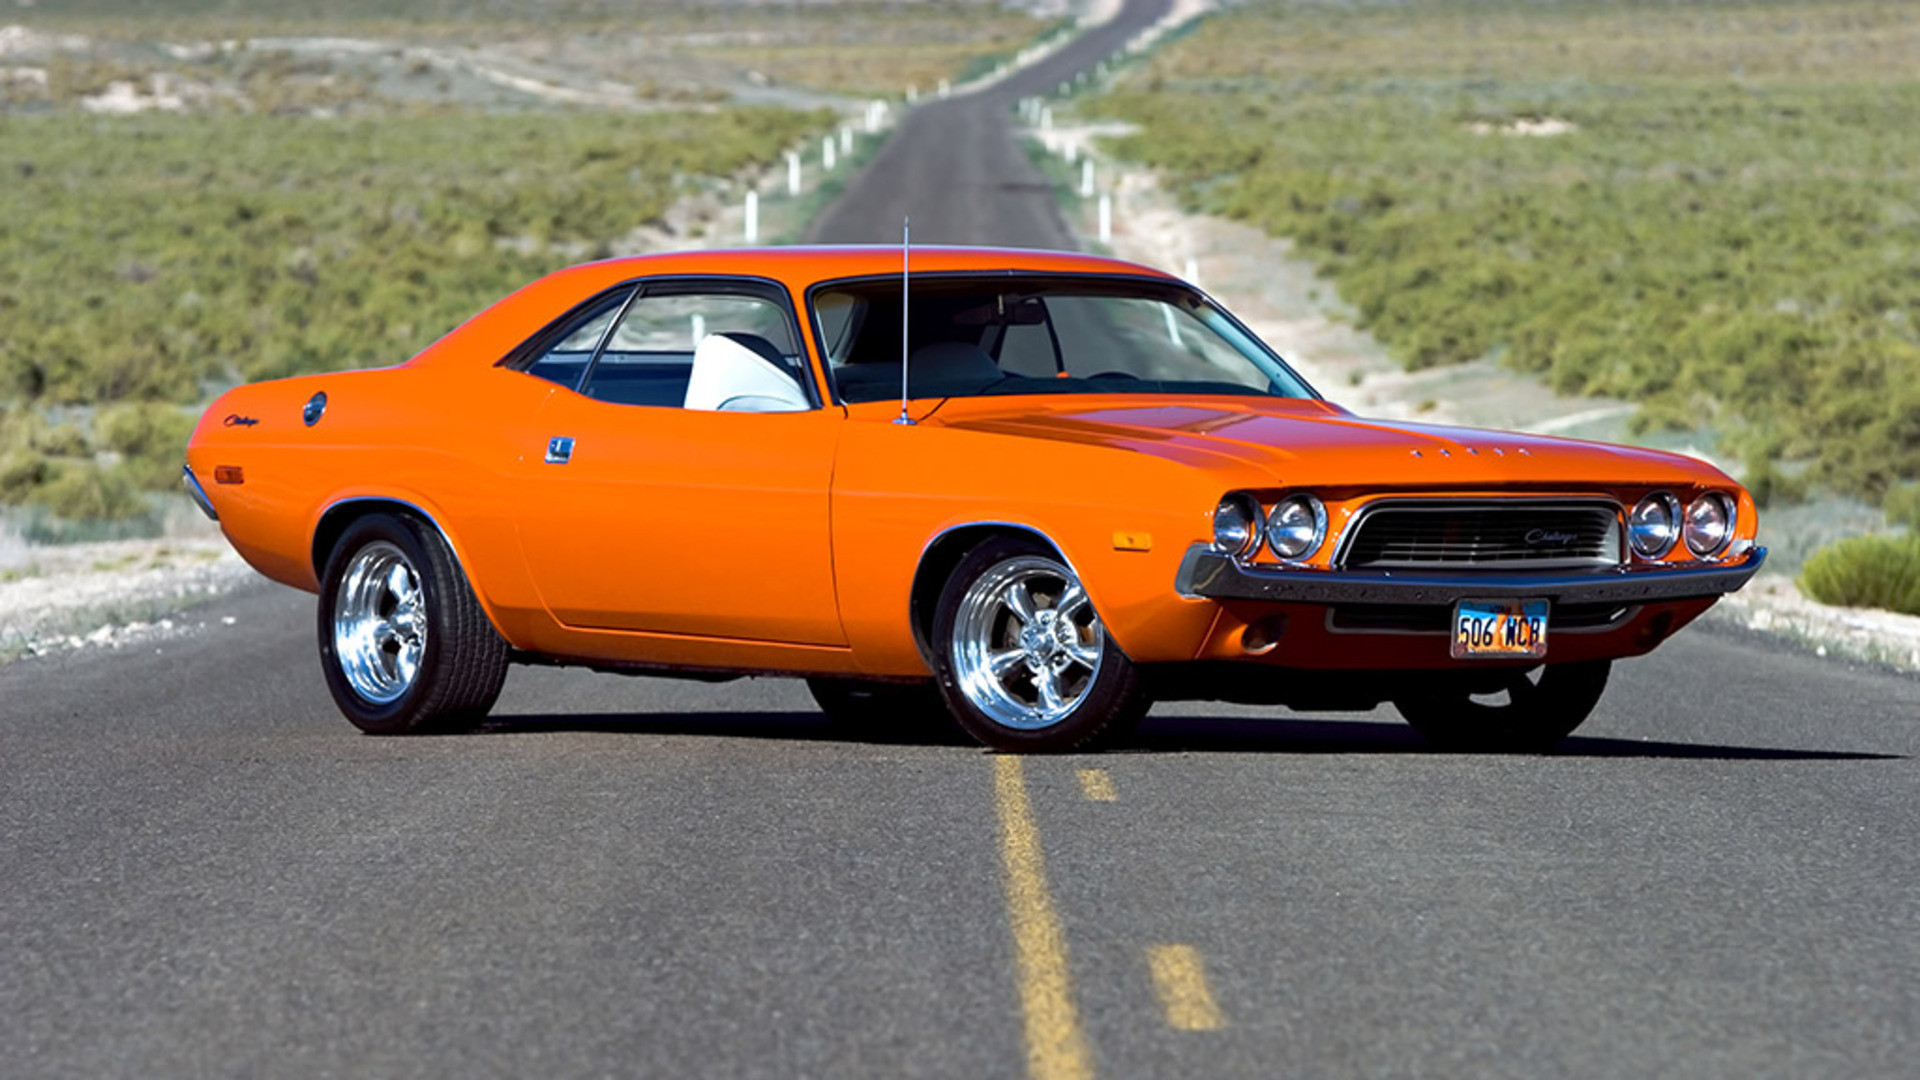 1920x1080 ... cool muscle car wallpapers images with high definition wallpaper